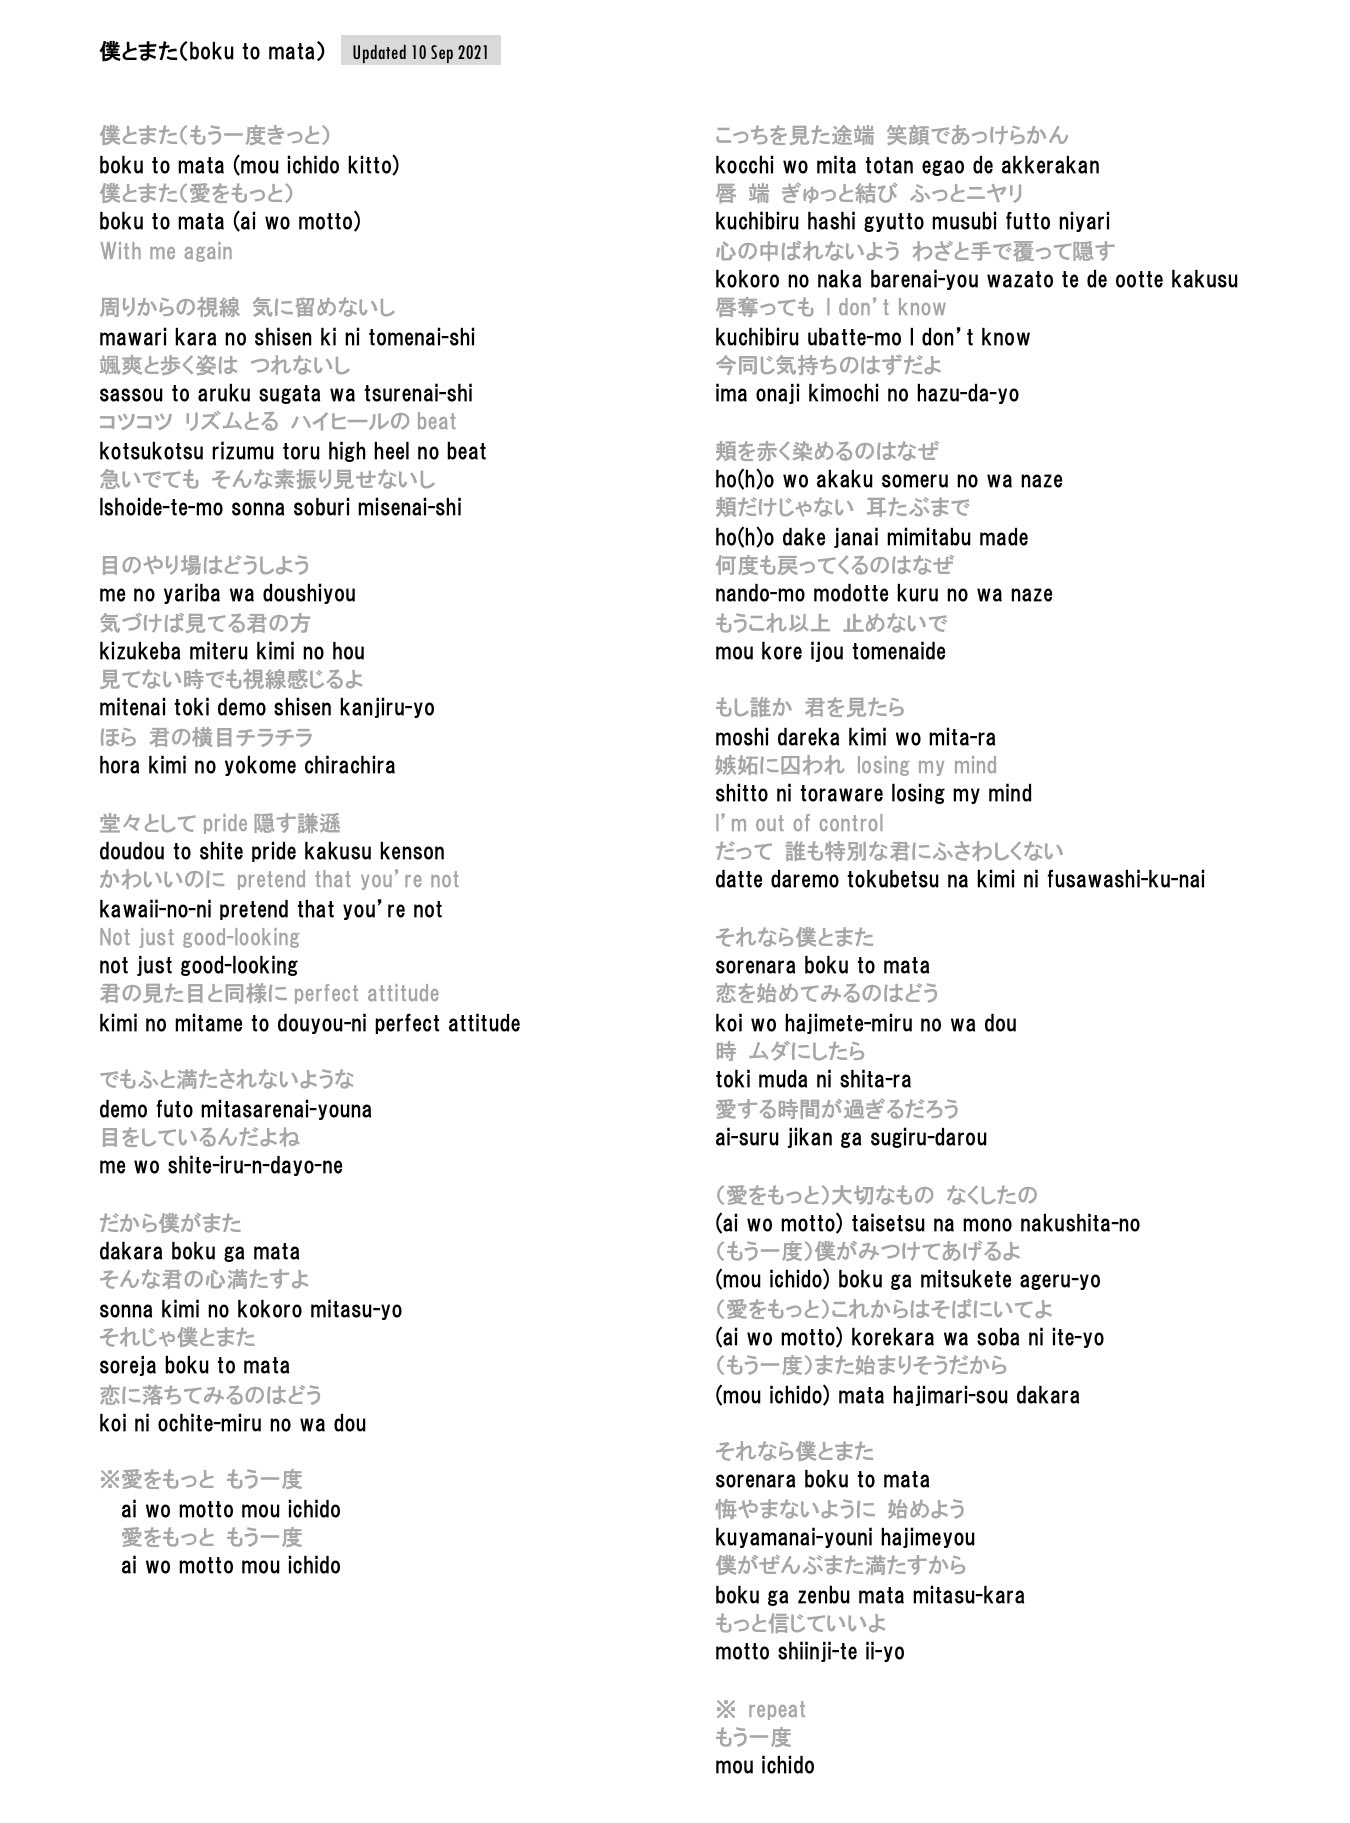 Albanglian 僕とまた Boku To Mata English Translation Of The Lyrics May Contain Errors And Inaccuracies T Co U6n6xf4fhw 2pm 2pmisback Withmeagain 僕とまた T Co Tu1peyi8pa Twitter